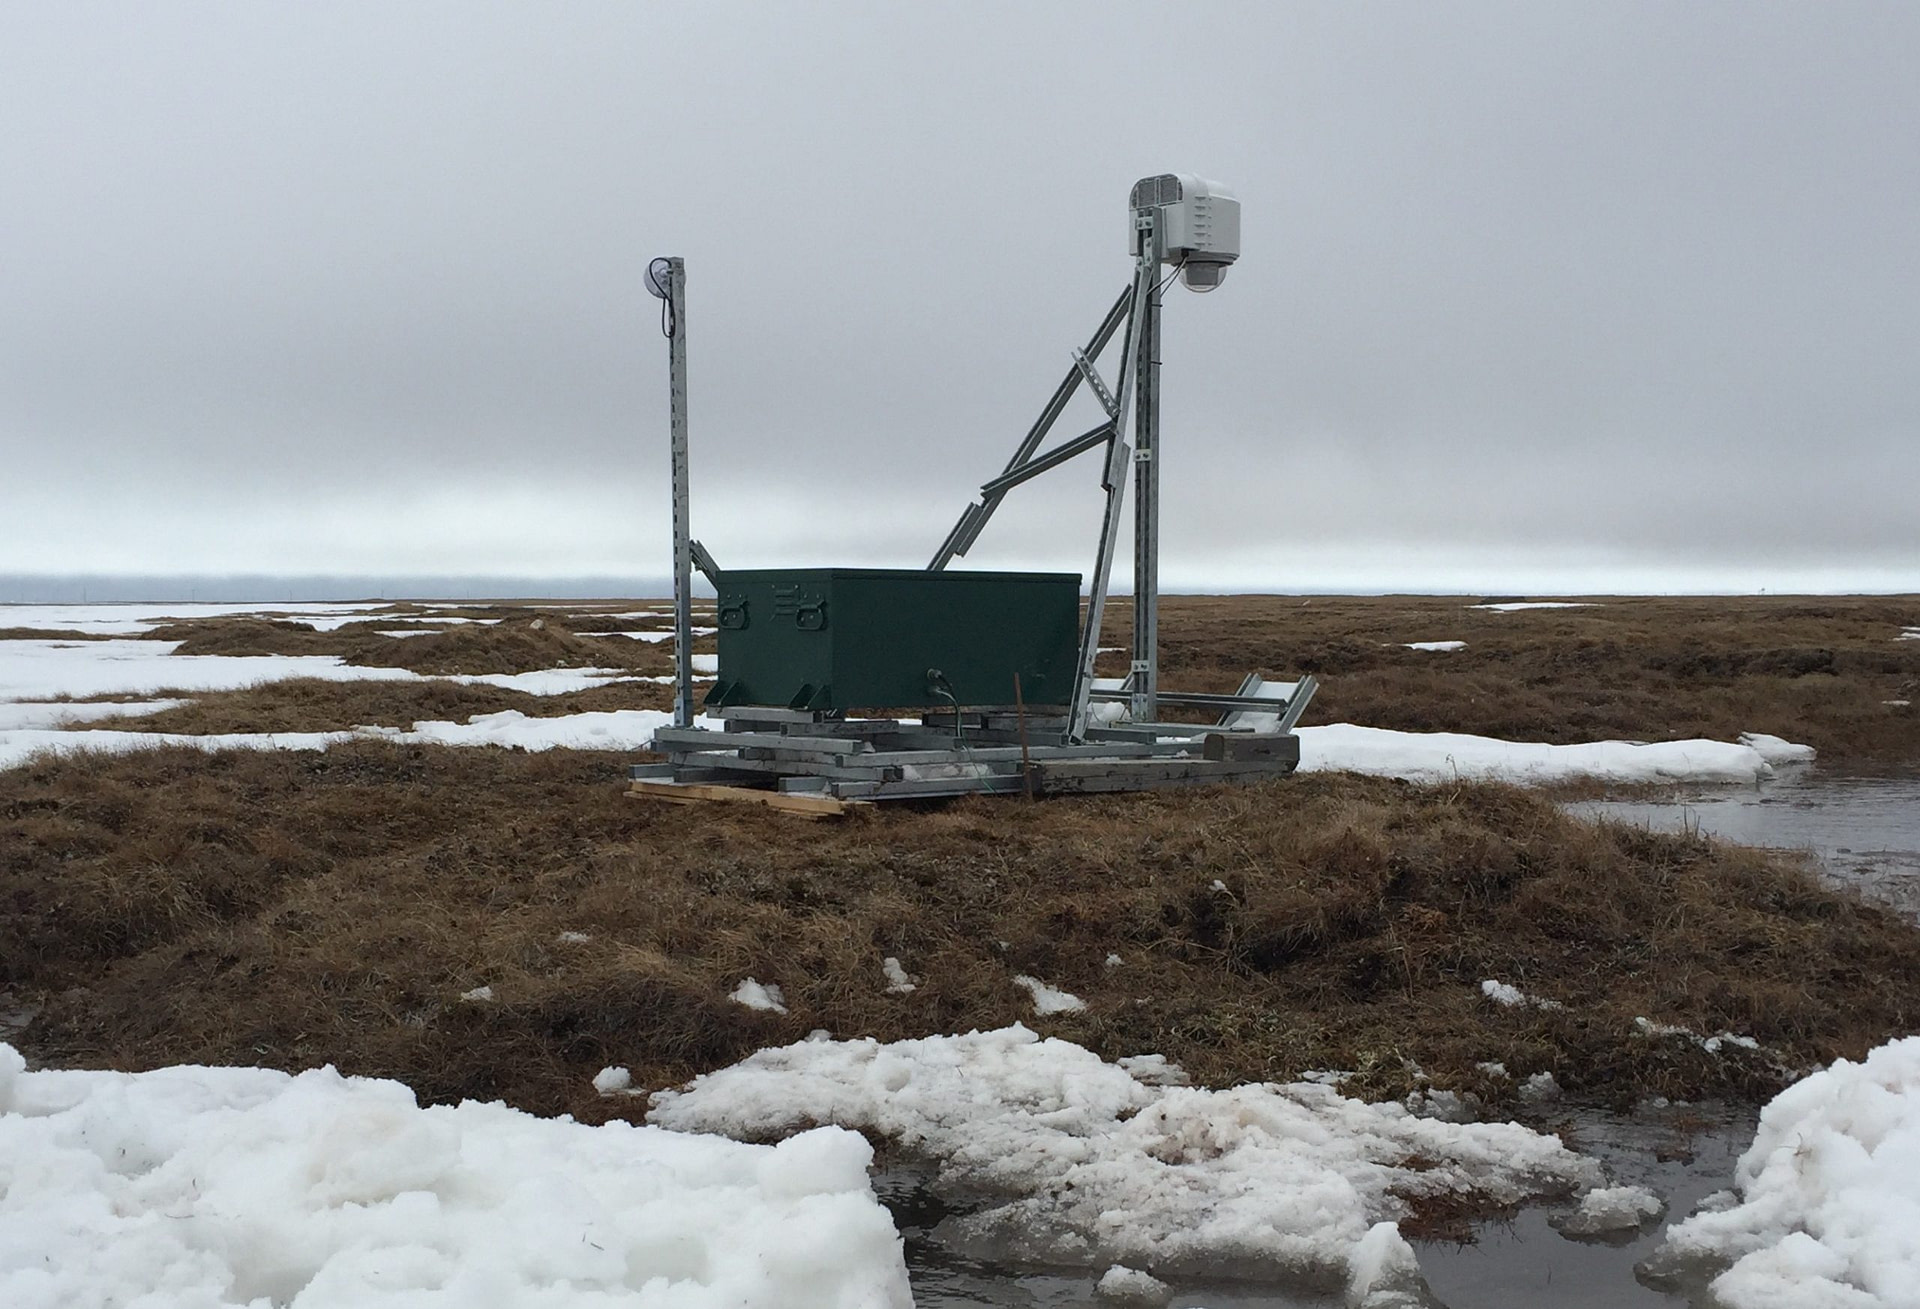 XHeat Climate Controlled PTZ Camera Enclosure System For Extreme Cold Conditions Installed Overlooking A Snowy Owl Nest Barrow Alaska 